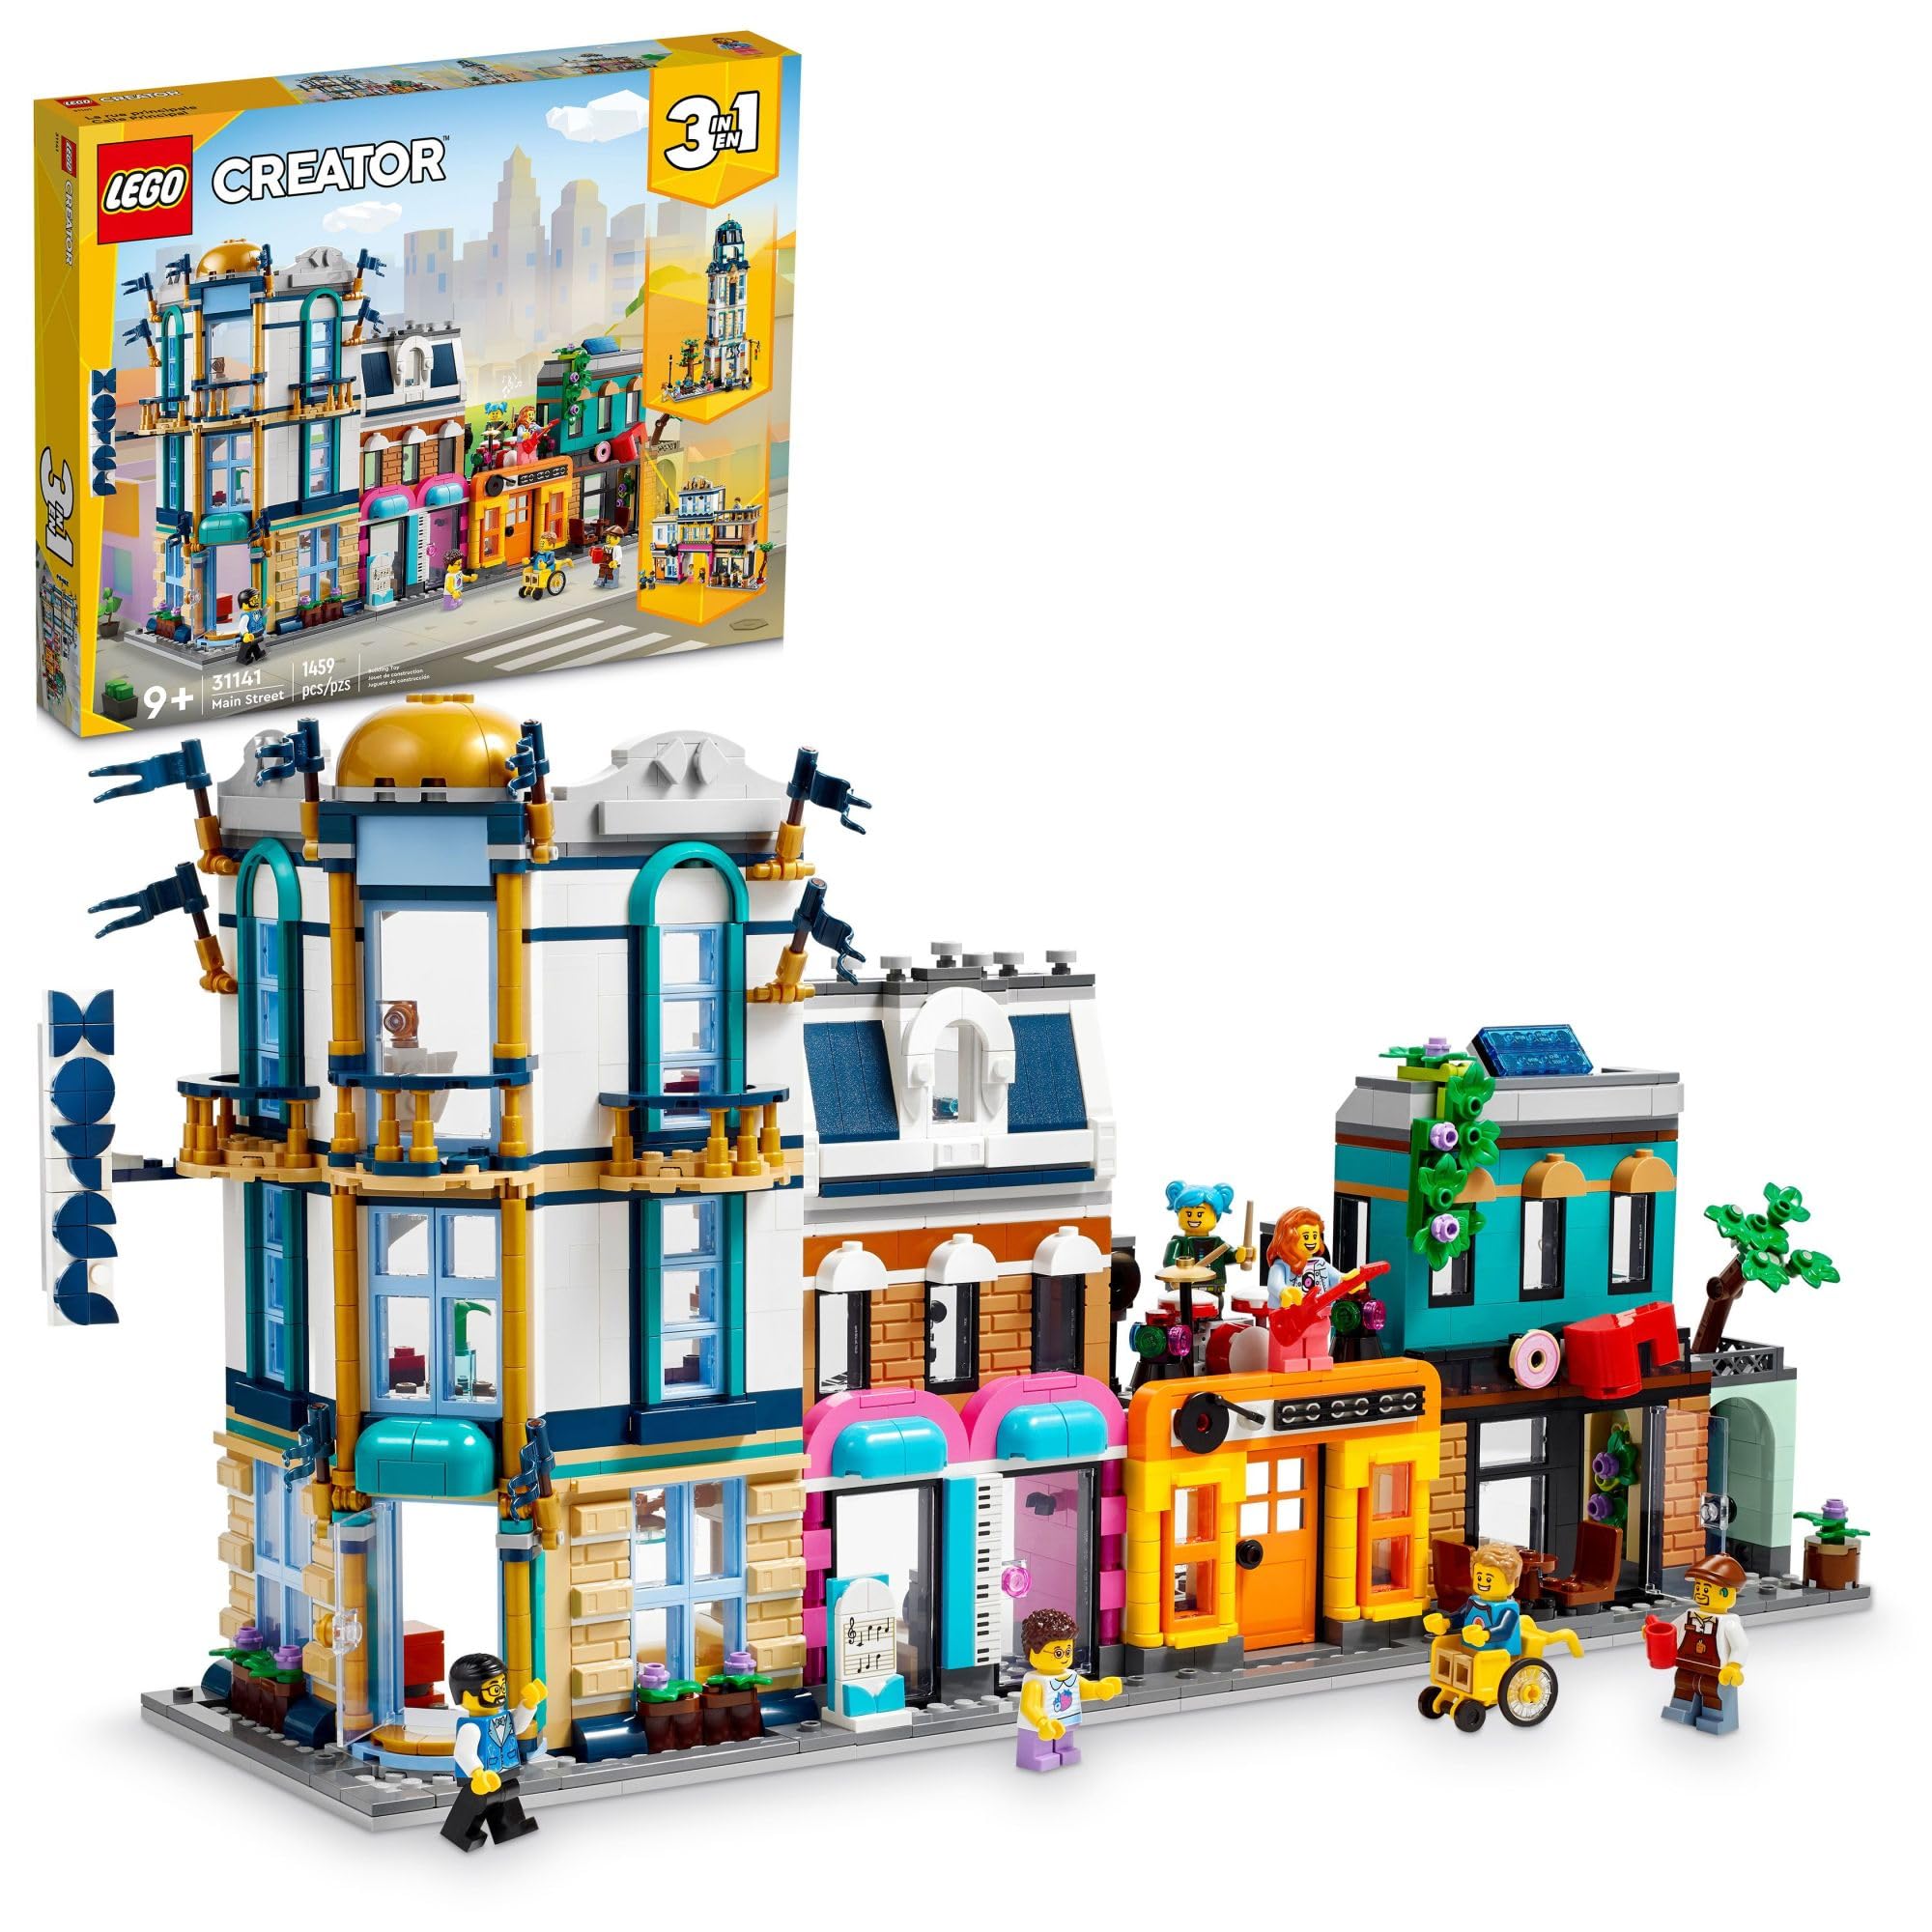 LEGO Creator Main Street 31141 Building Toy Set, 3 in 1 Features a Toy City Art Deco Building, Market Street Hotel, Café Music Store and 6 Minifigures, Endless Play Possi - $90